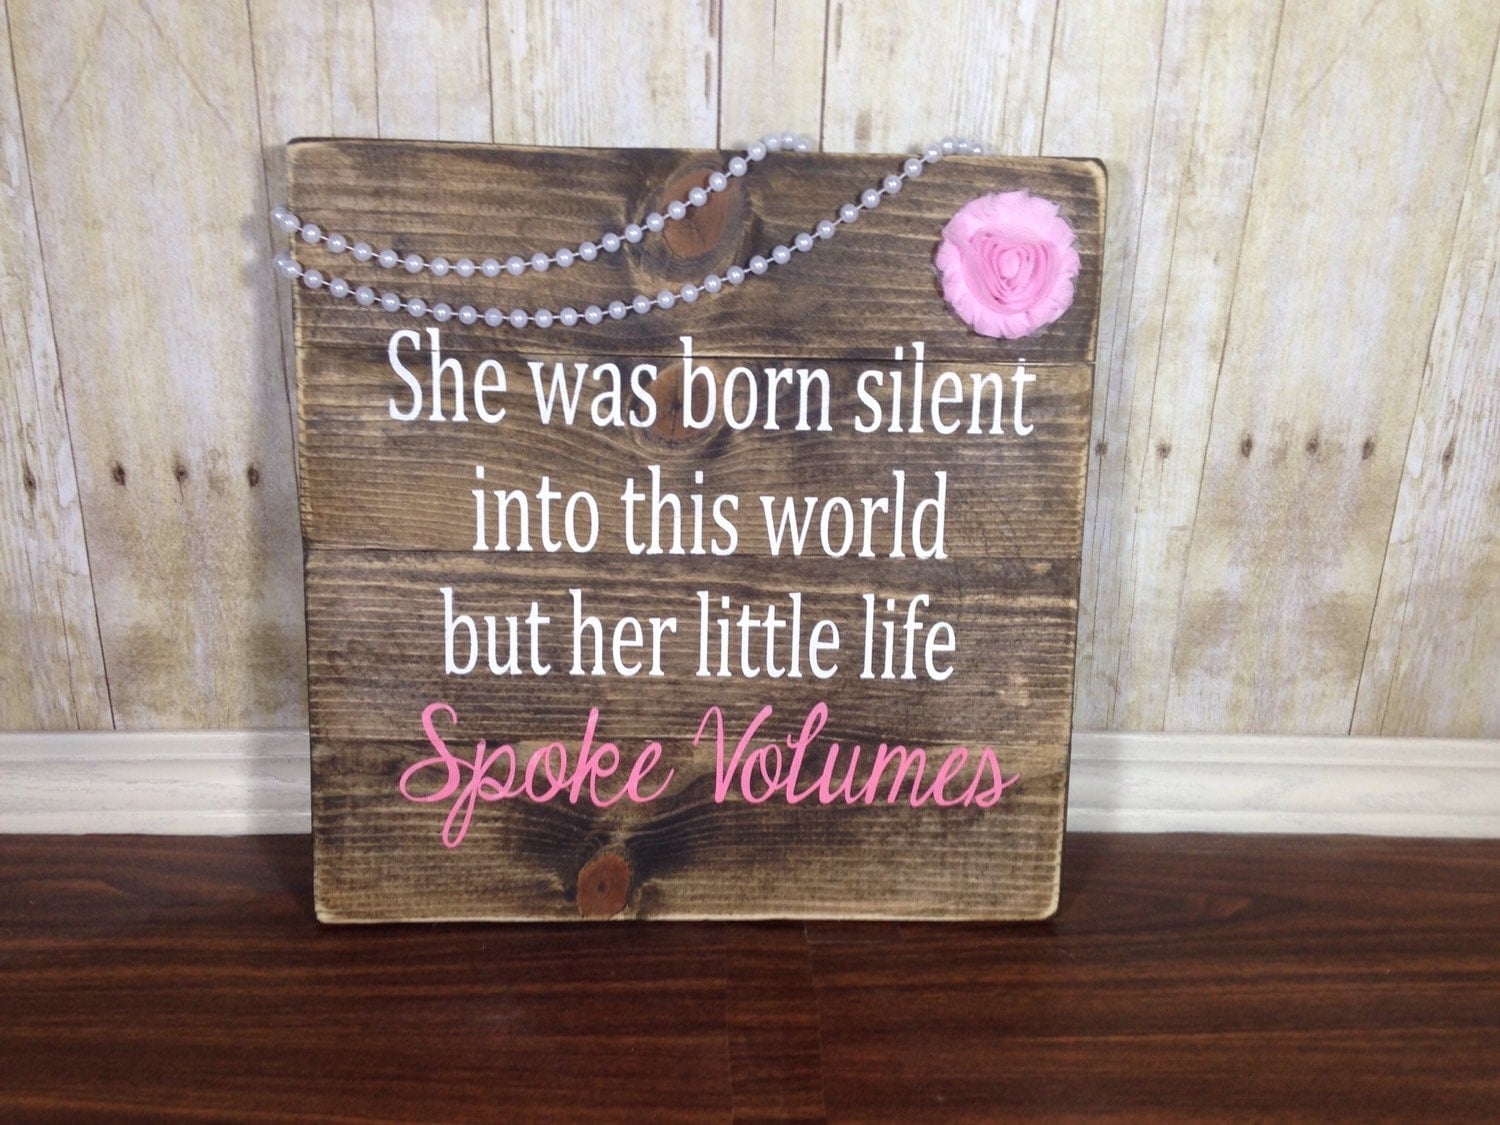 She little life. Quotes on Gifts.